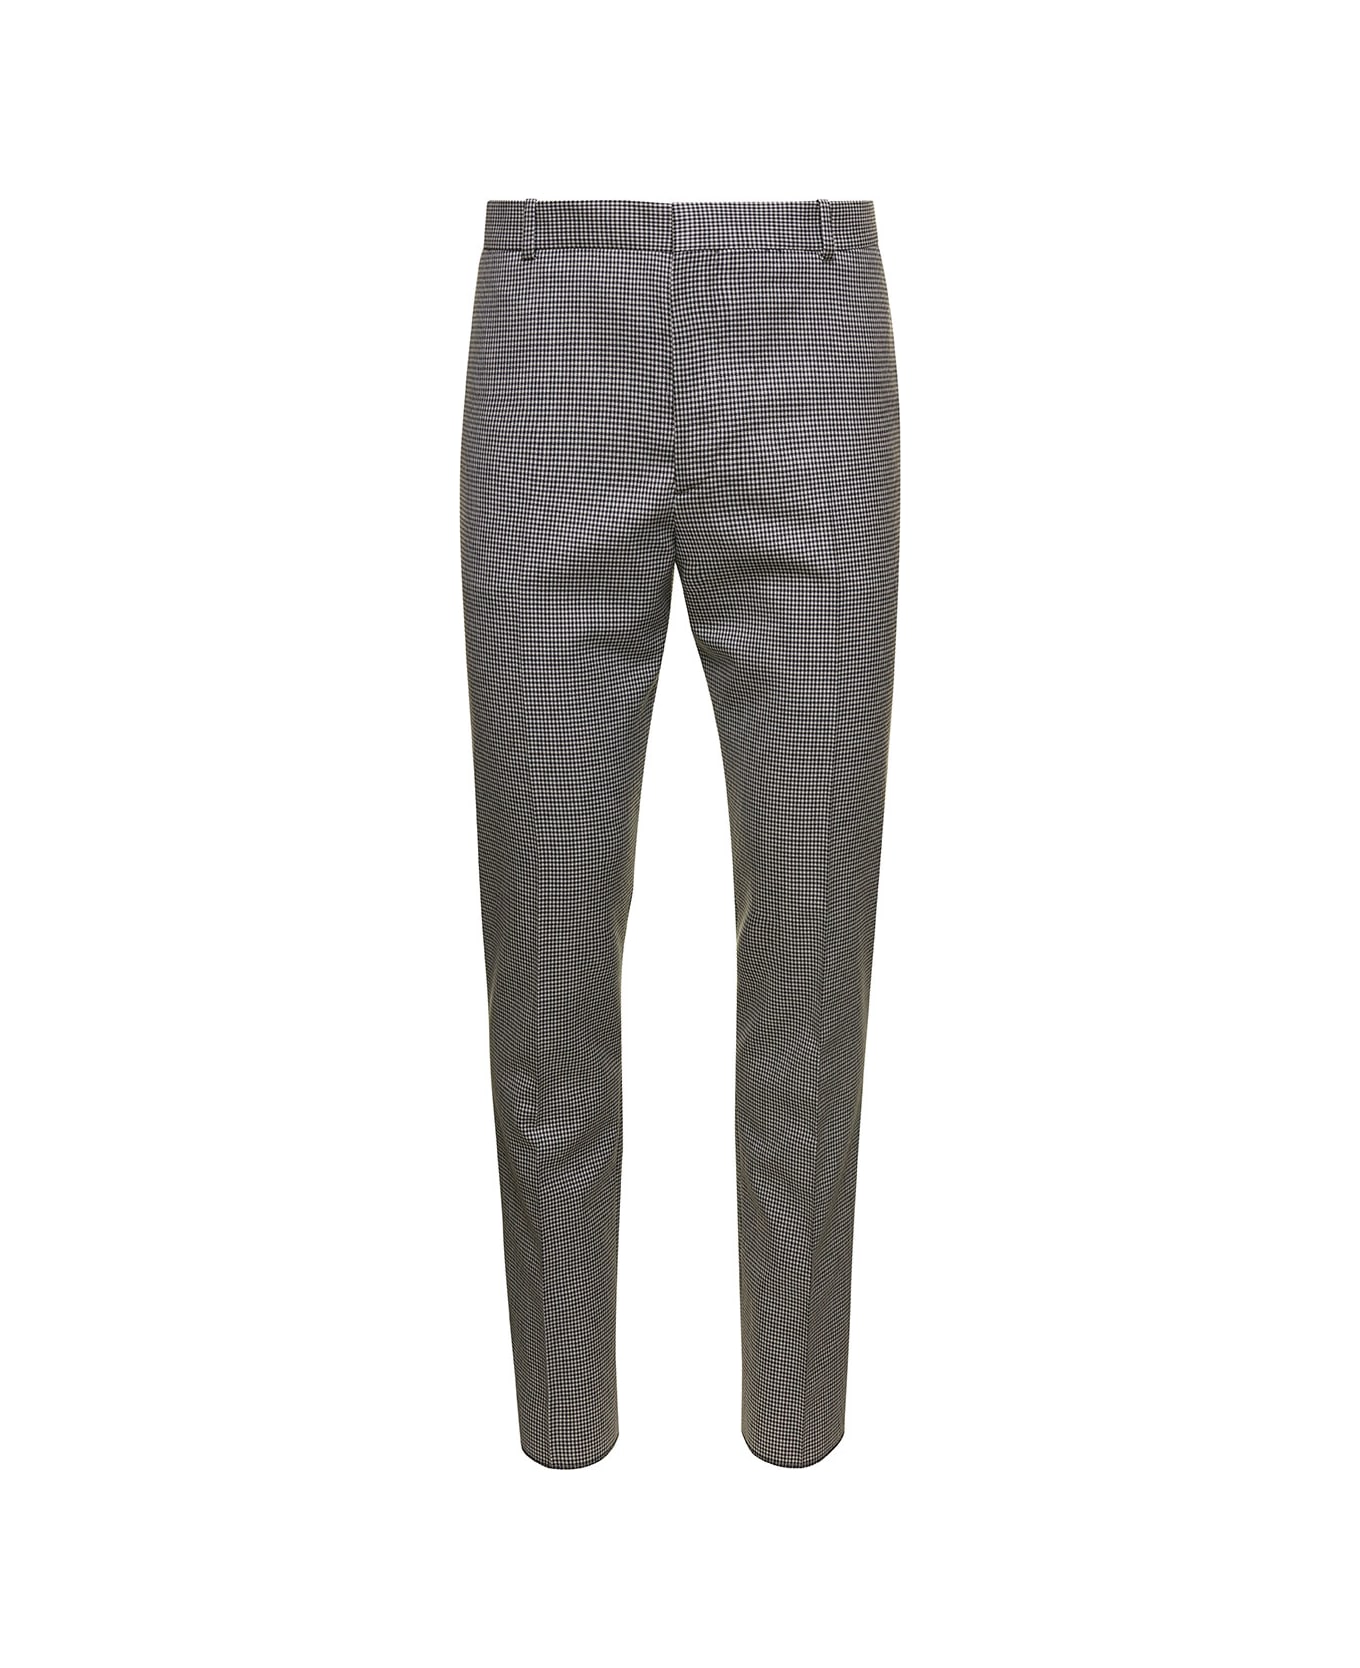 Alexander McQueen Grey Cigarette Pants With Houndstooth Pattern In Wool Man - Grey